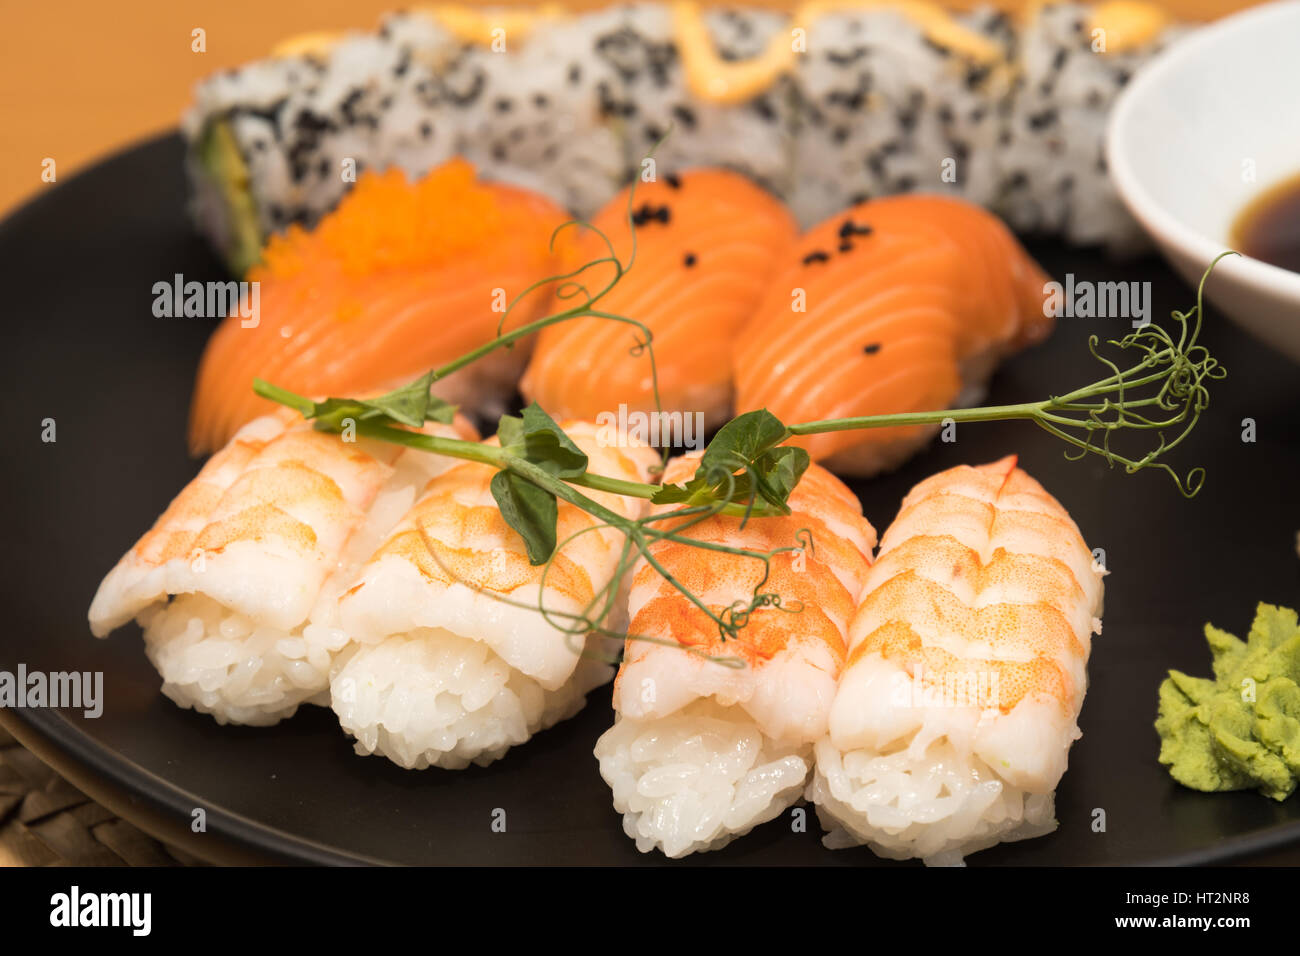 Closeup of a sushi lunch on a black plate Stock Photo